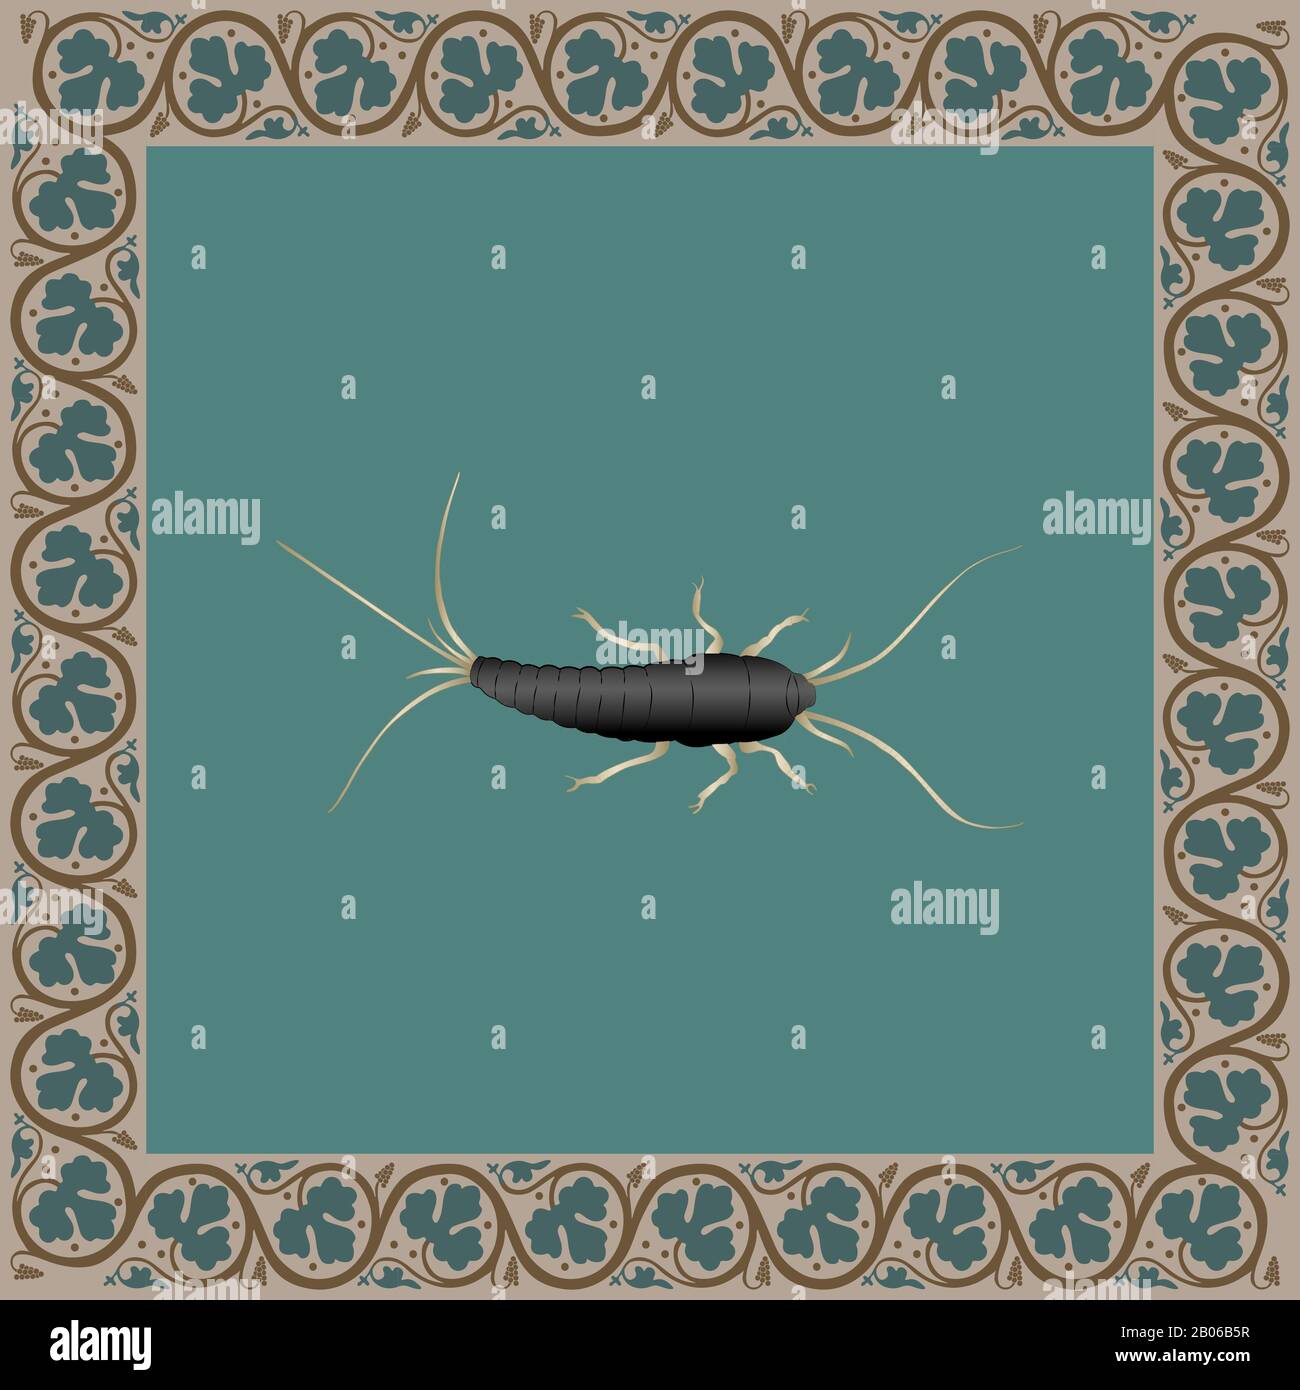 Silverfish color illustration in medieval floral frame. Vector. Stock Vector